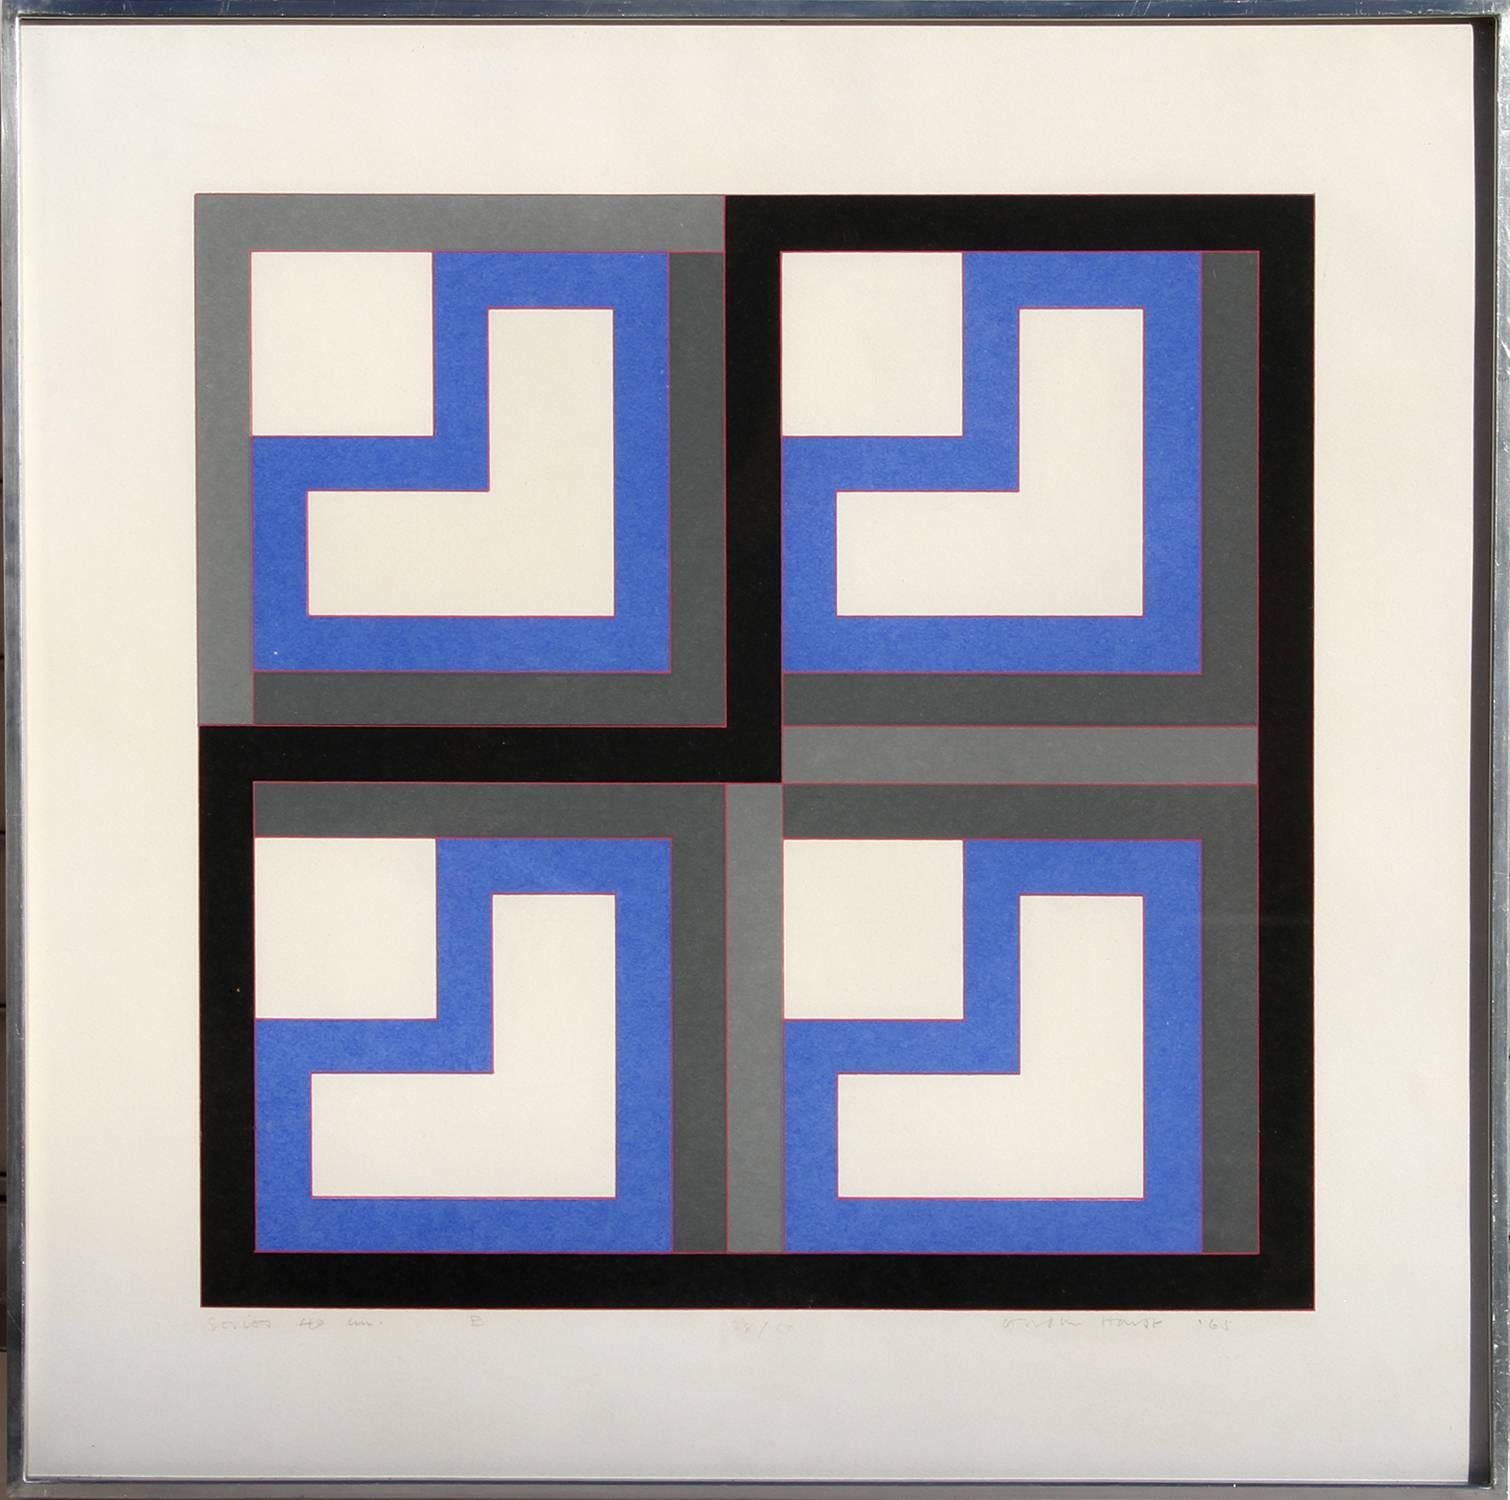 This screenprint was created by Welsh artist Gordon House (1932-2004). House was a designer and painter whose hard-edged abstract works reflected the dramatic tensions of his graphic design, like in this piece here. This print is signed and numbered